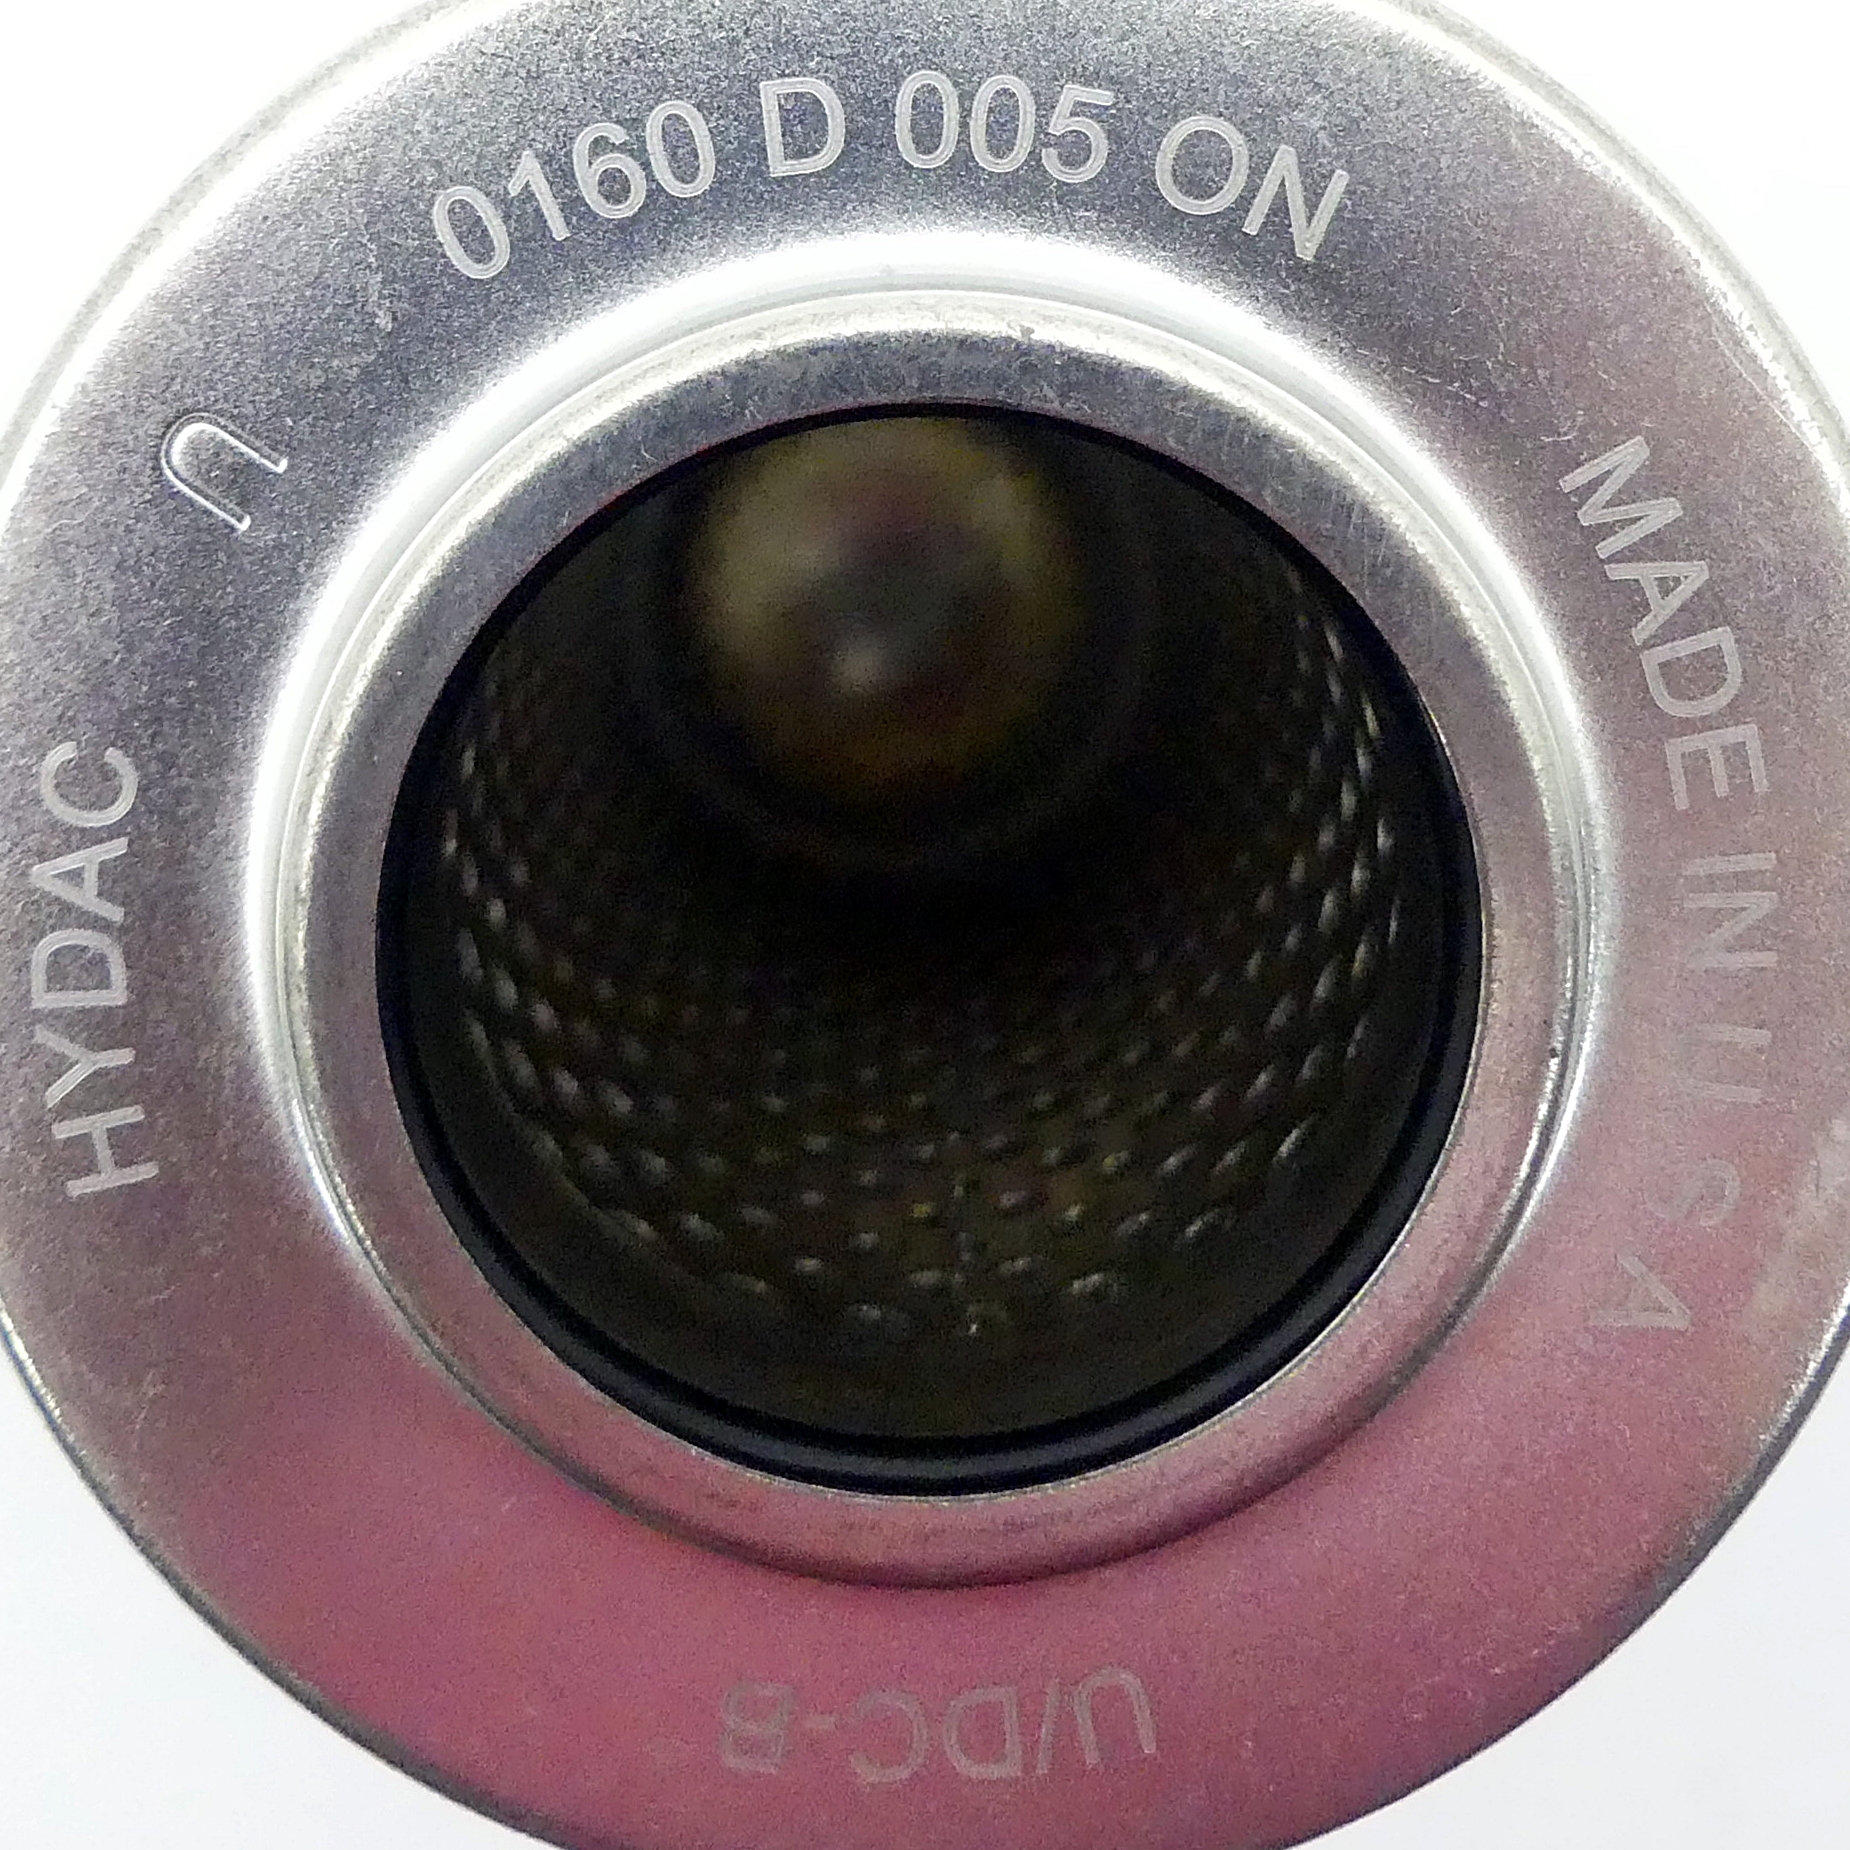 Filter inserts 0 160 D 005 ON 